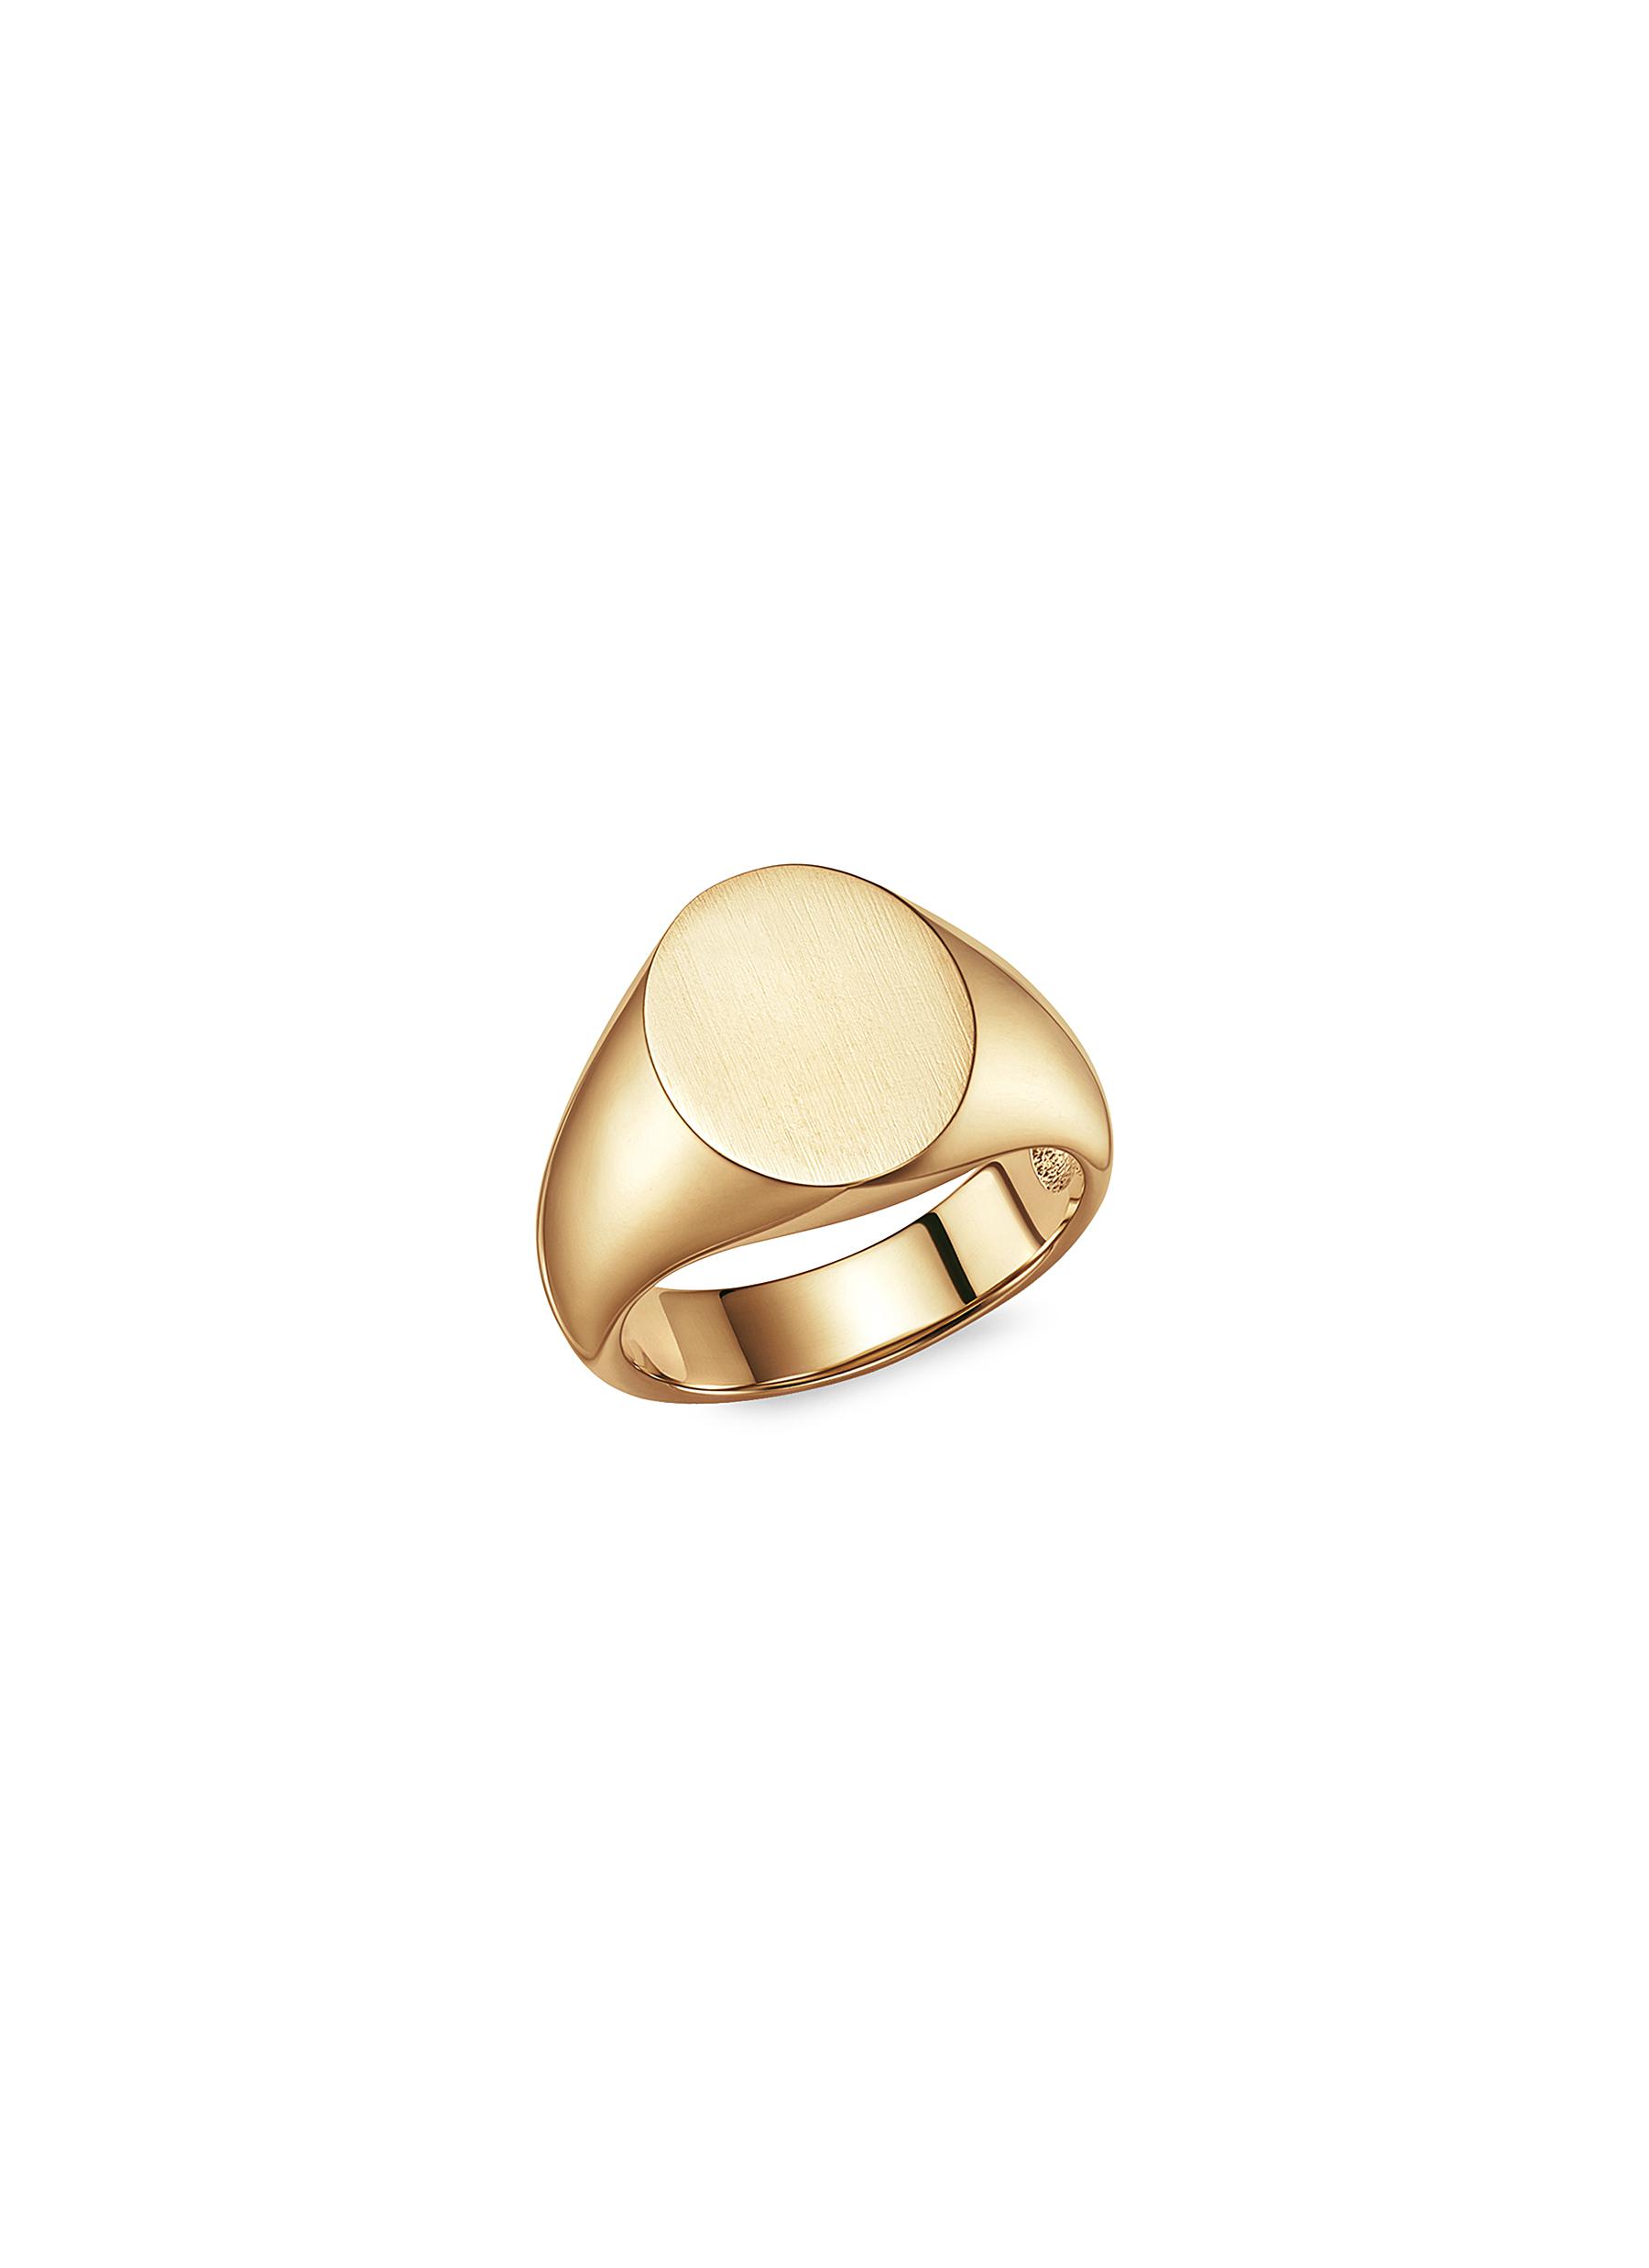 FUTURA 18k fairmined ecological gold signet ring